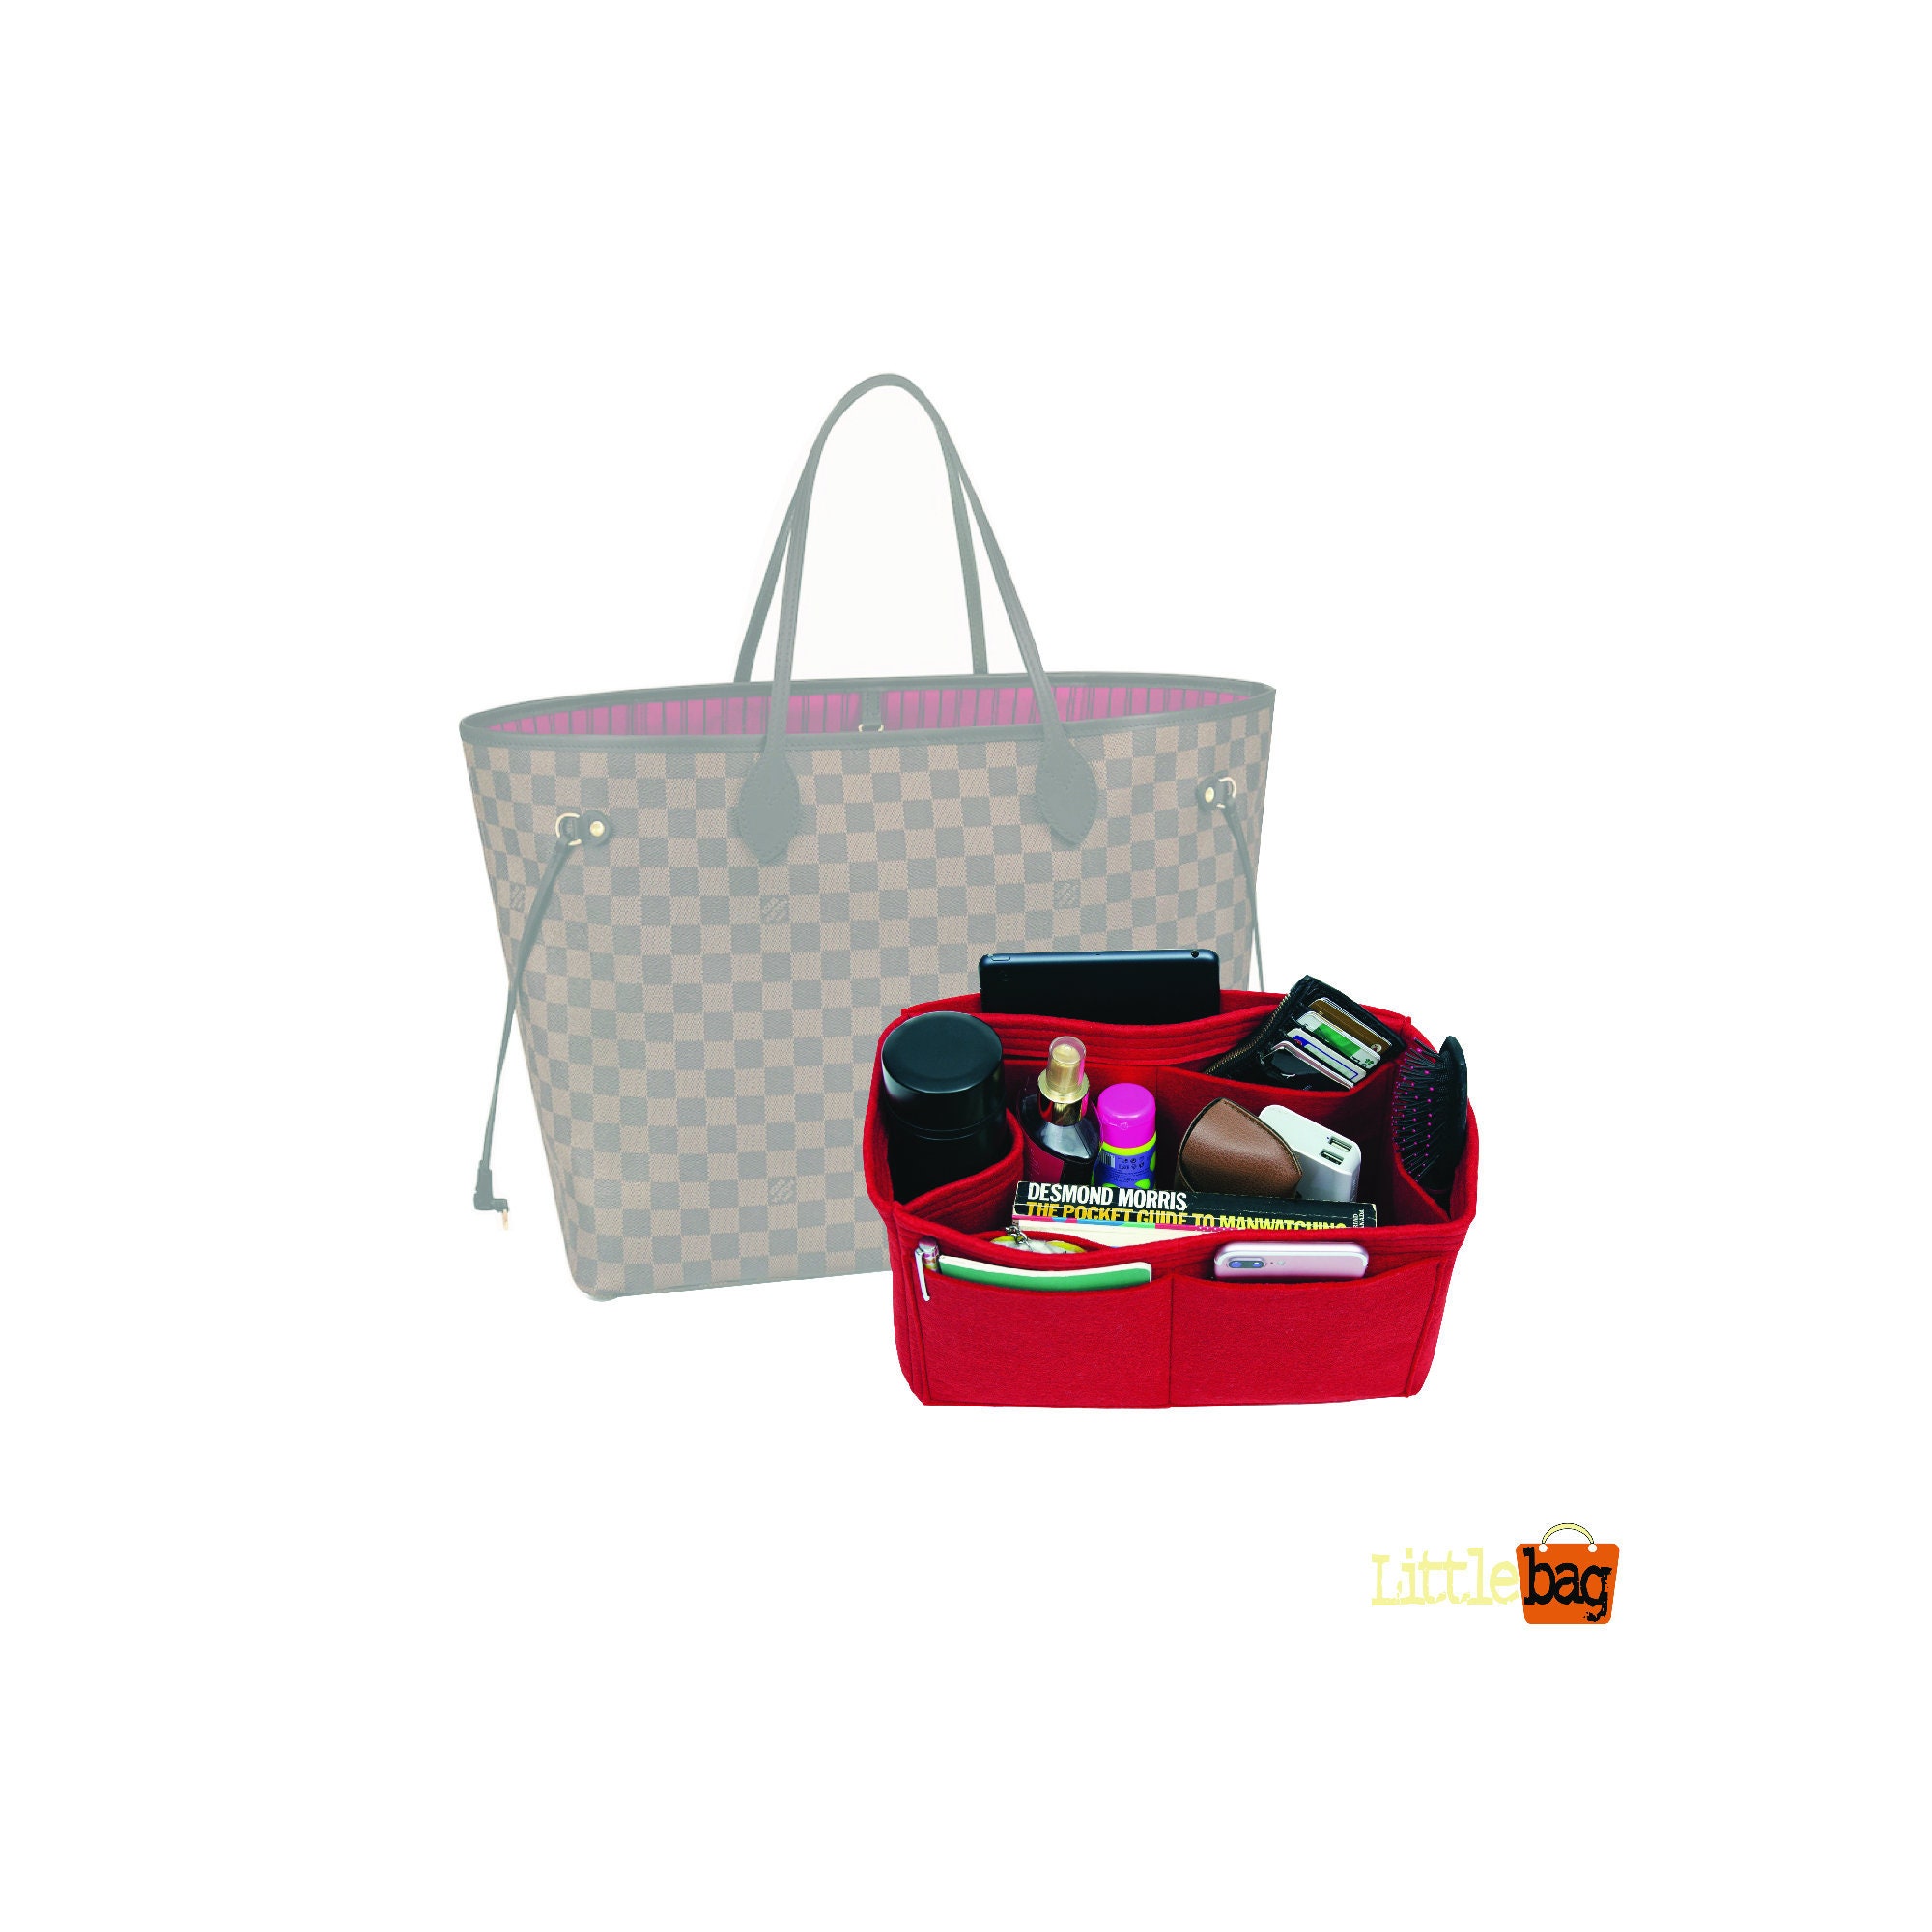 Bag and Purse Organizer with Chamber Style for Louis Vuitton Neverfull PM, Neverfull  MM and Neverfull GM